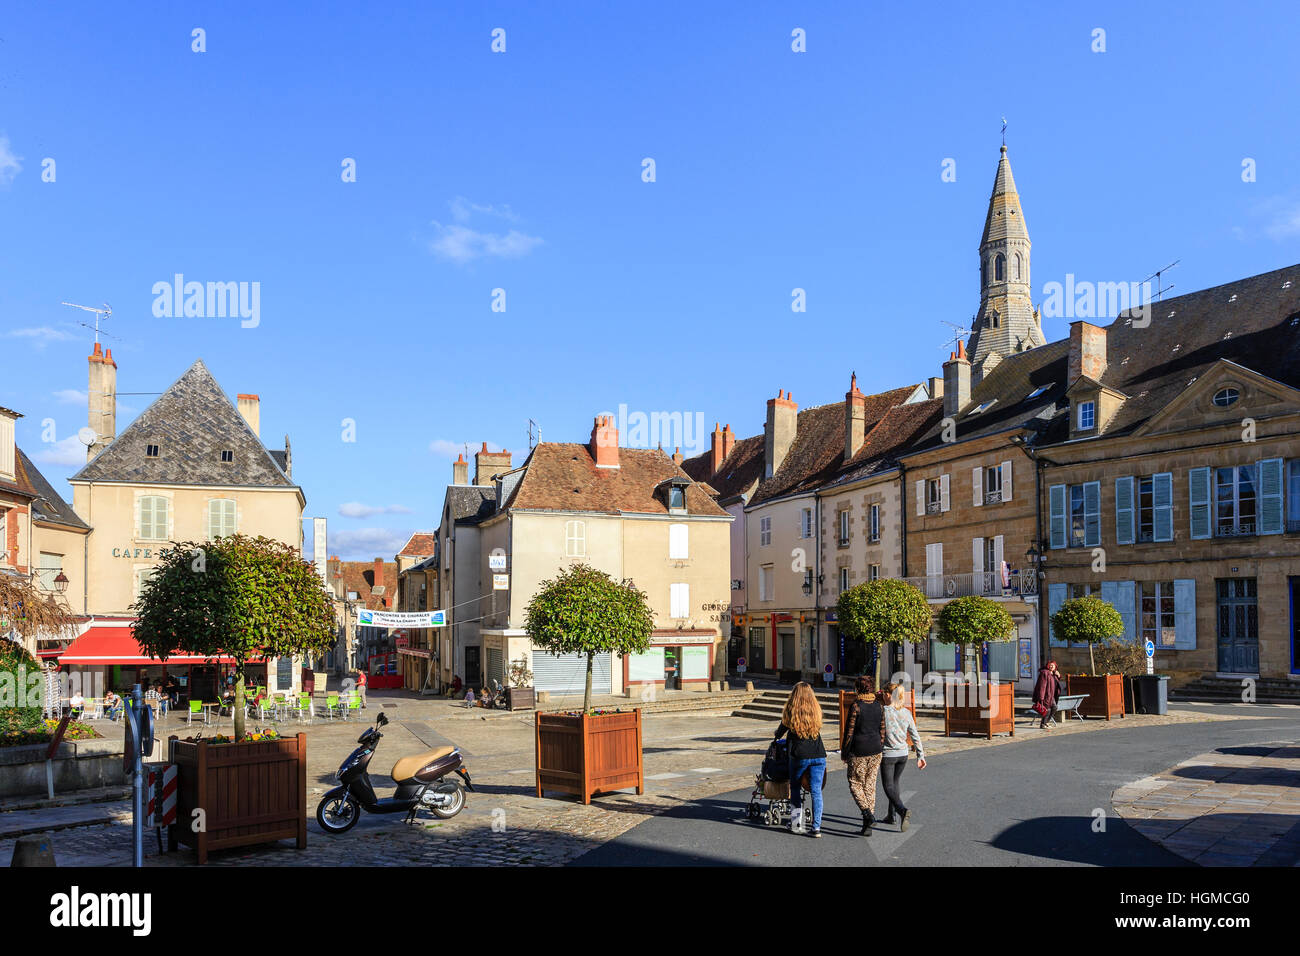 France, Indre, La Chatre, houses of the Marketplace and the Saint Germain's church bell Stock Photo